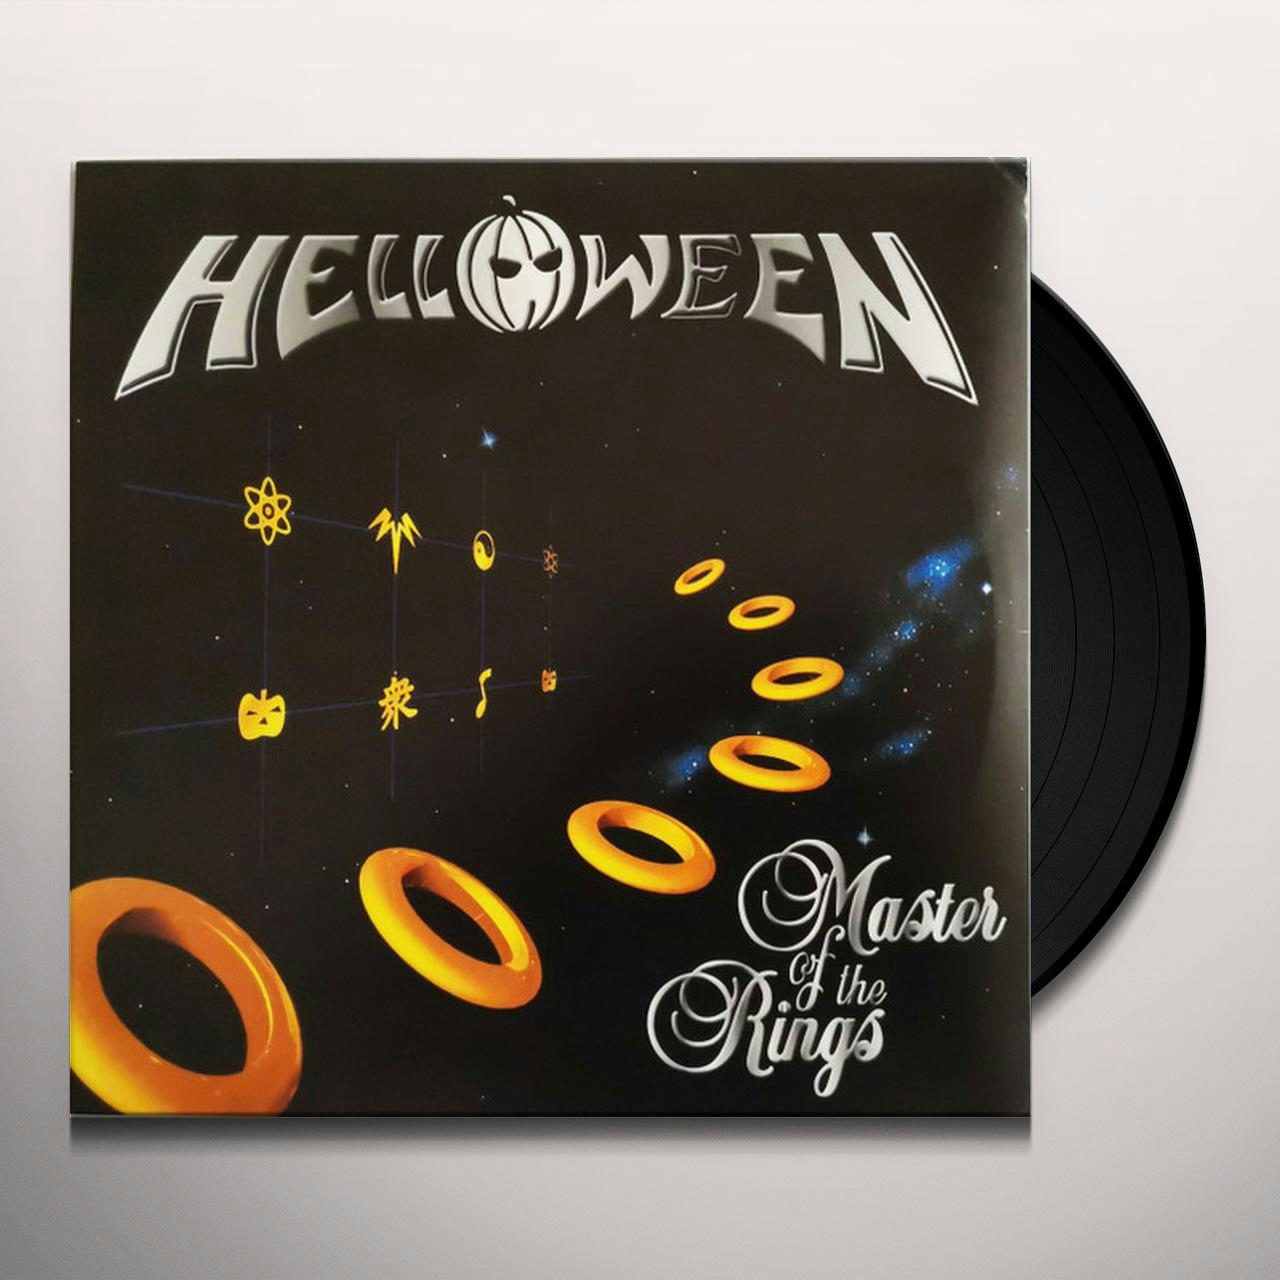 Helloween - Master of the Rings - Amazon.com Music